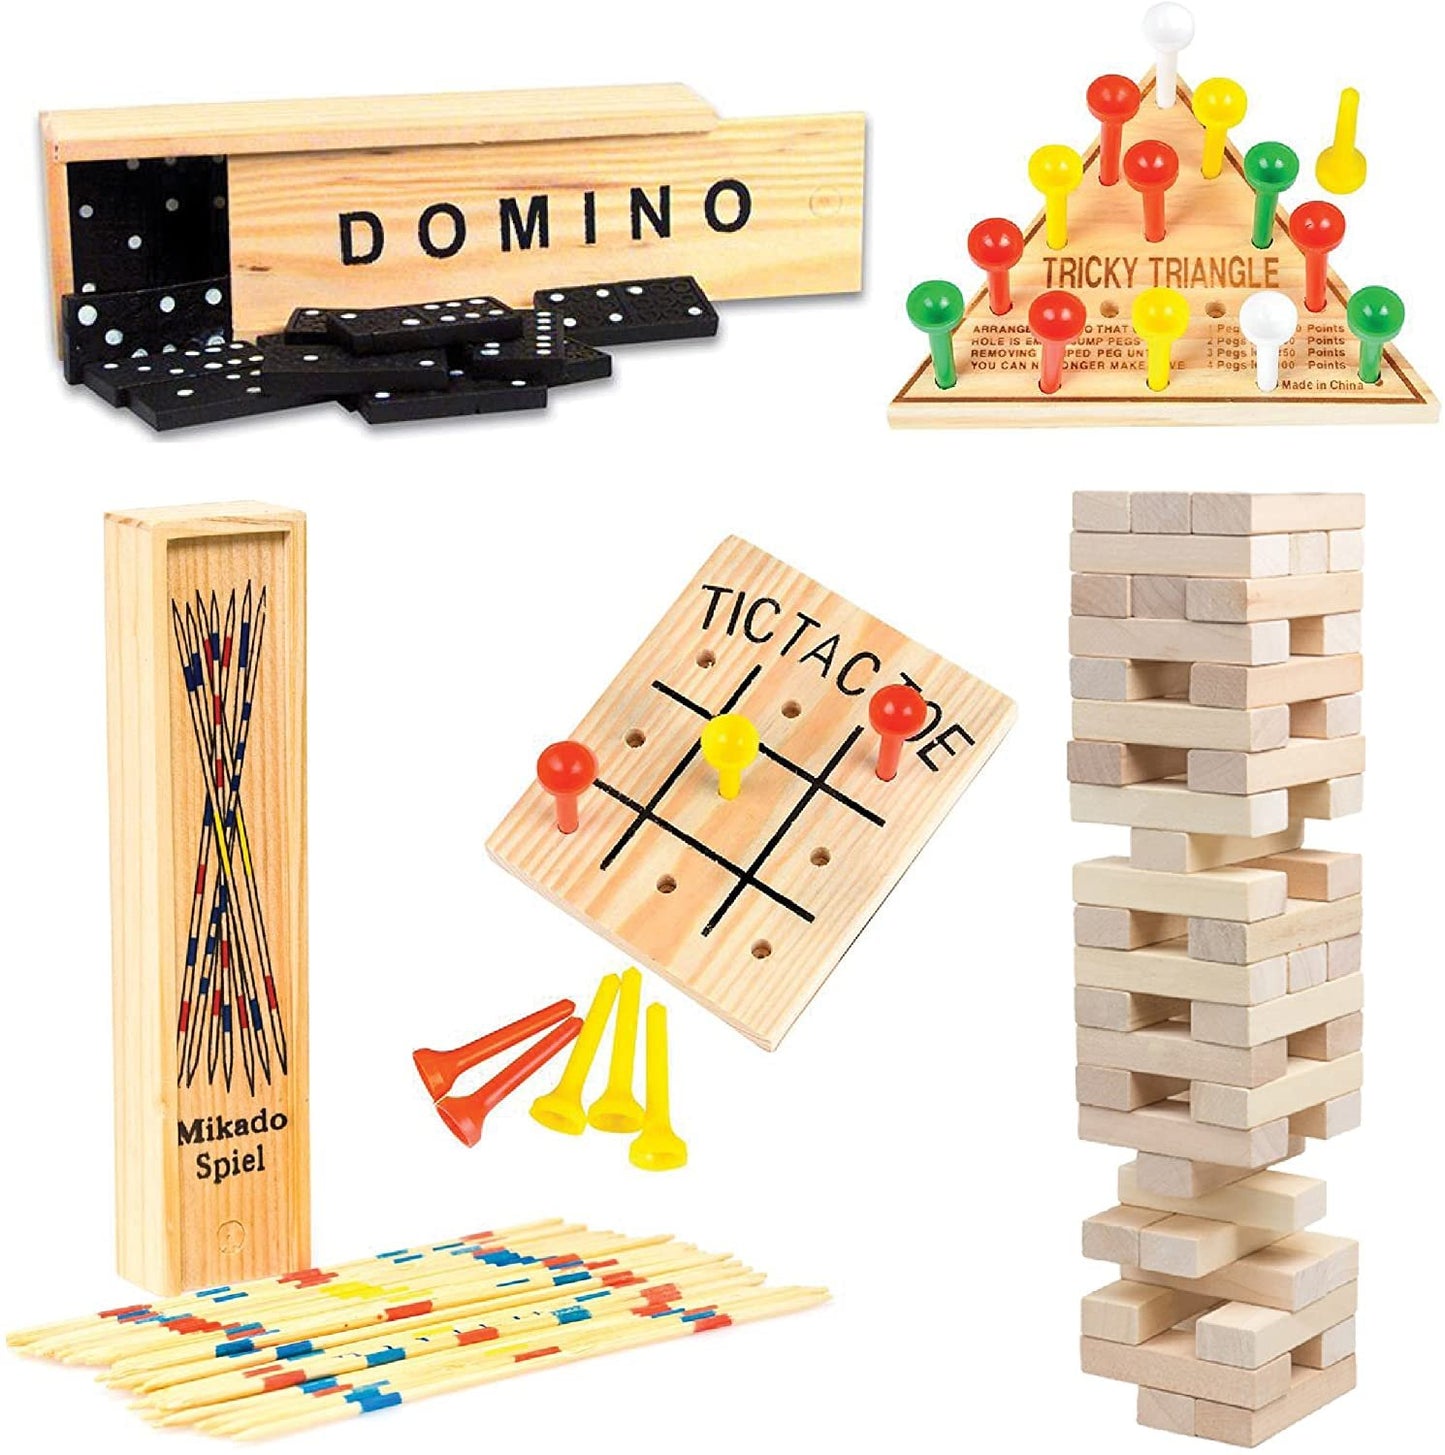 Wooden Game Set by GamieTM - 5 Fun Games for Kids and Family - Includes Tic-Tac-Toe, Tower, Domino, Triangle, Pick-up Stick - Compact Size - Best Gift for Boy or Girl 5+.